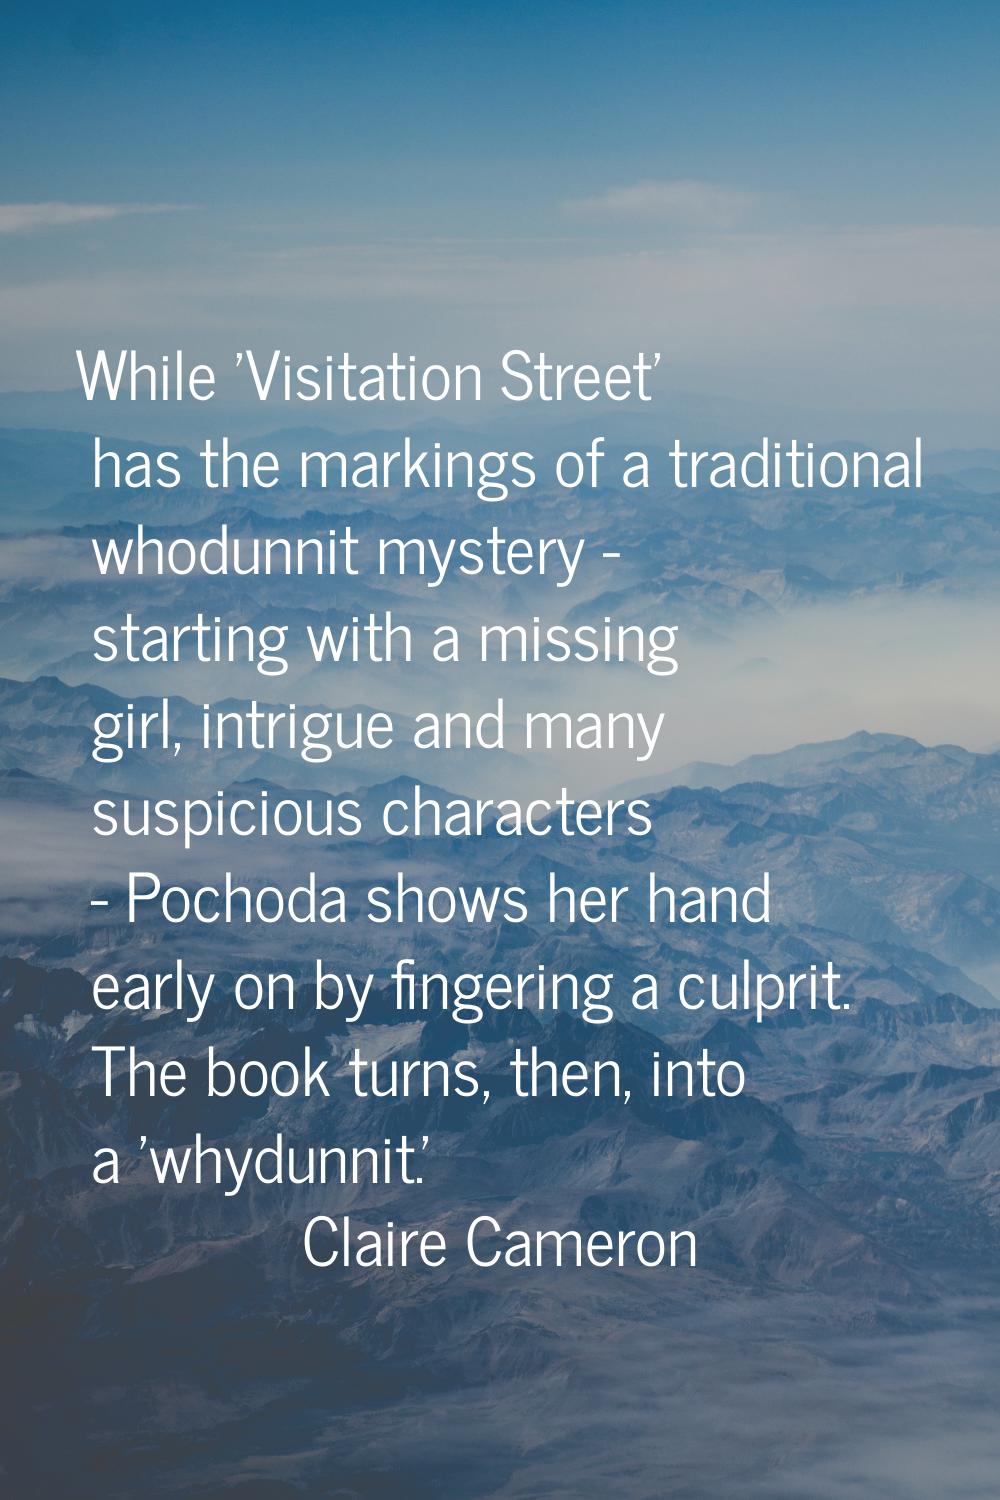 While 'Visitation Street' has the markings of a traditional whodunnit mystery - starting with a mis